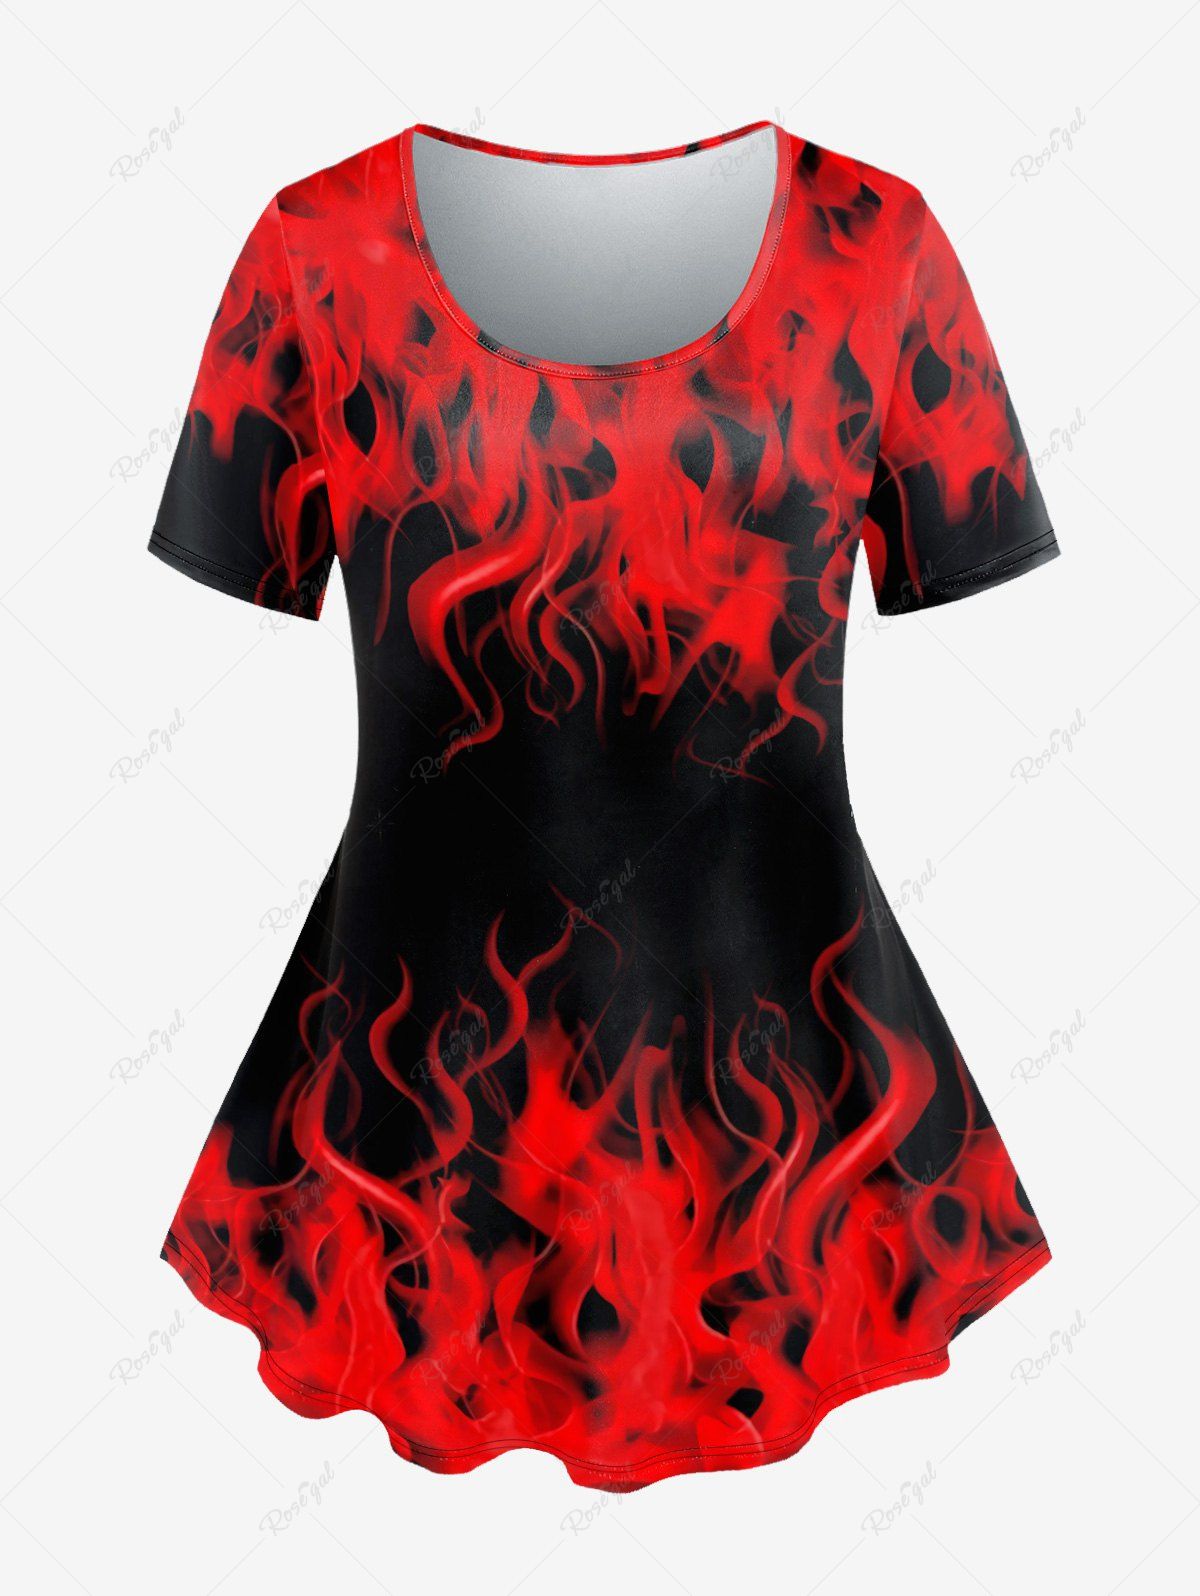 Outfit Gothic 3D Flame Print Short Sleeve T-Shirt  